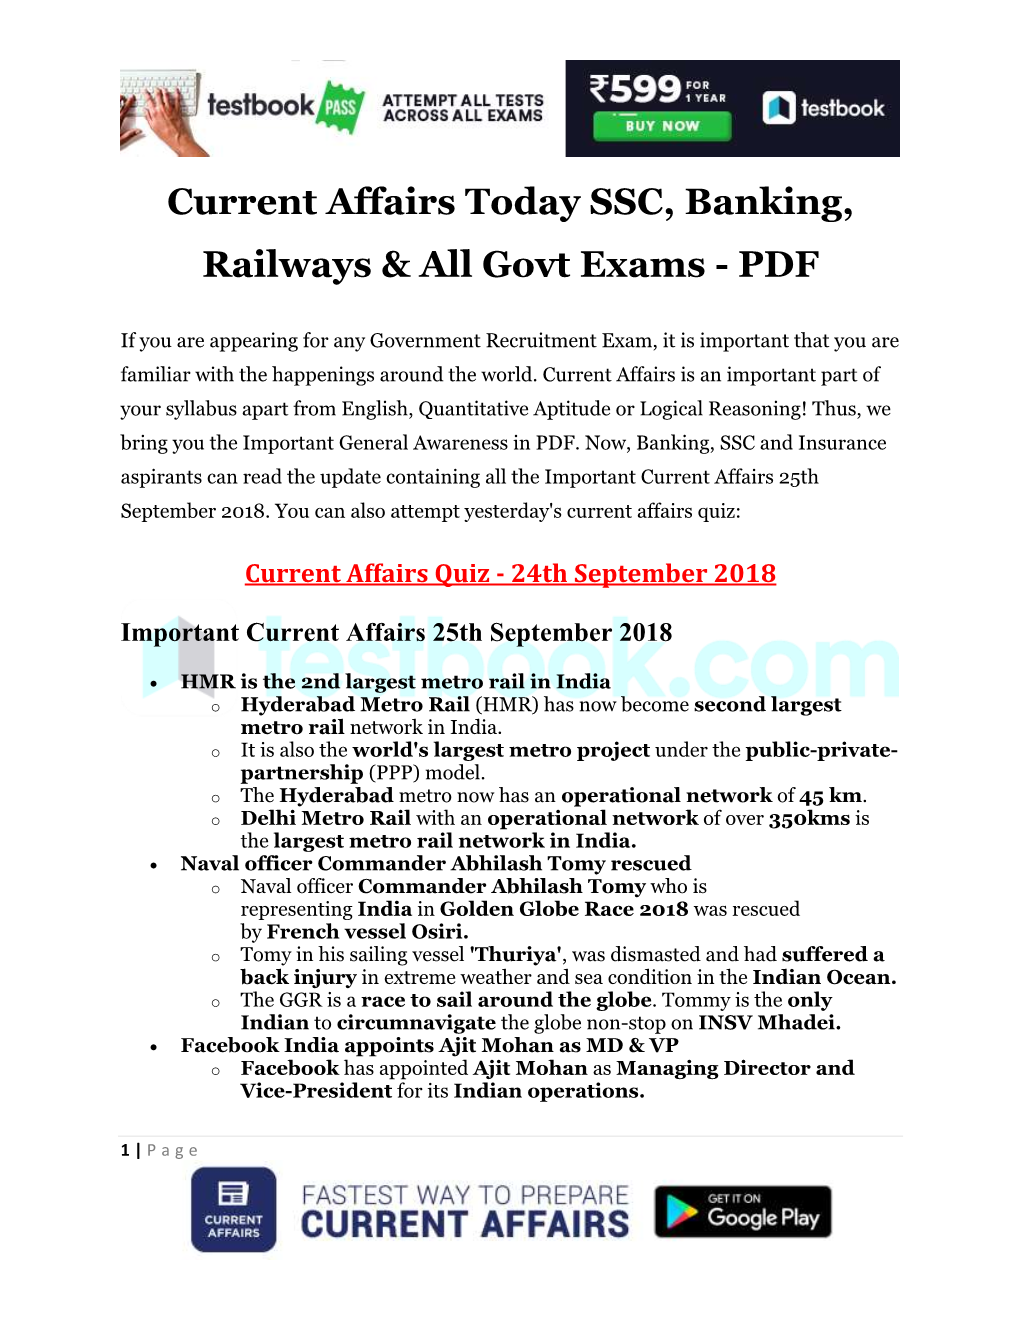 Current Affairs Today SSC, Banking, Railways & All